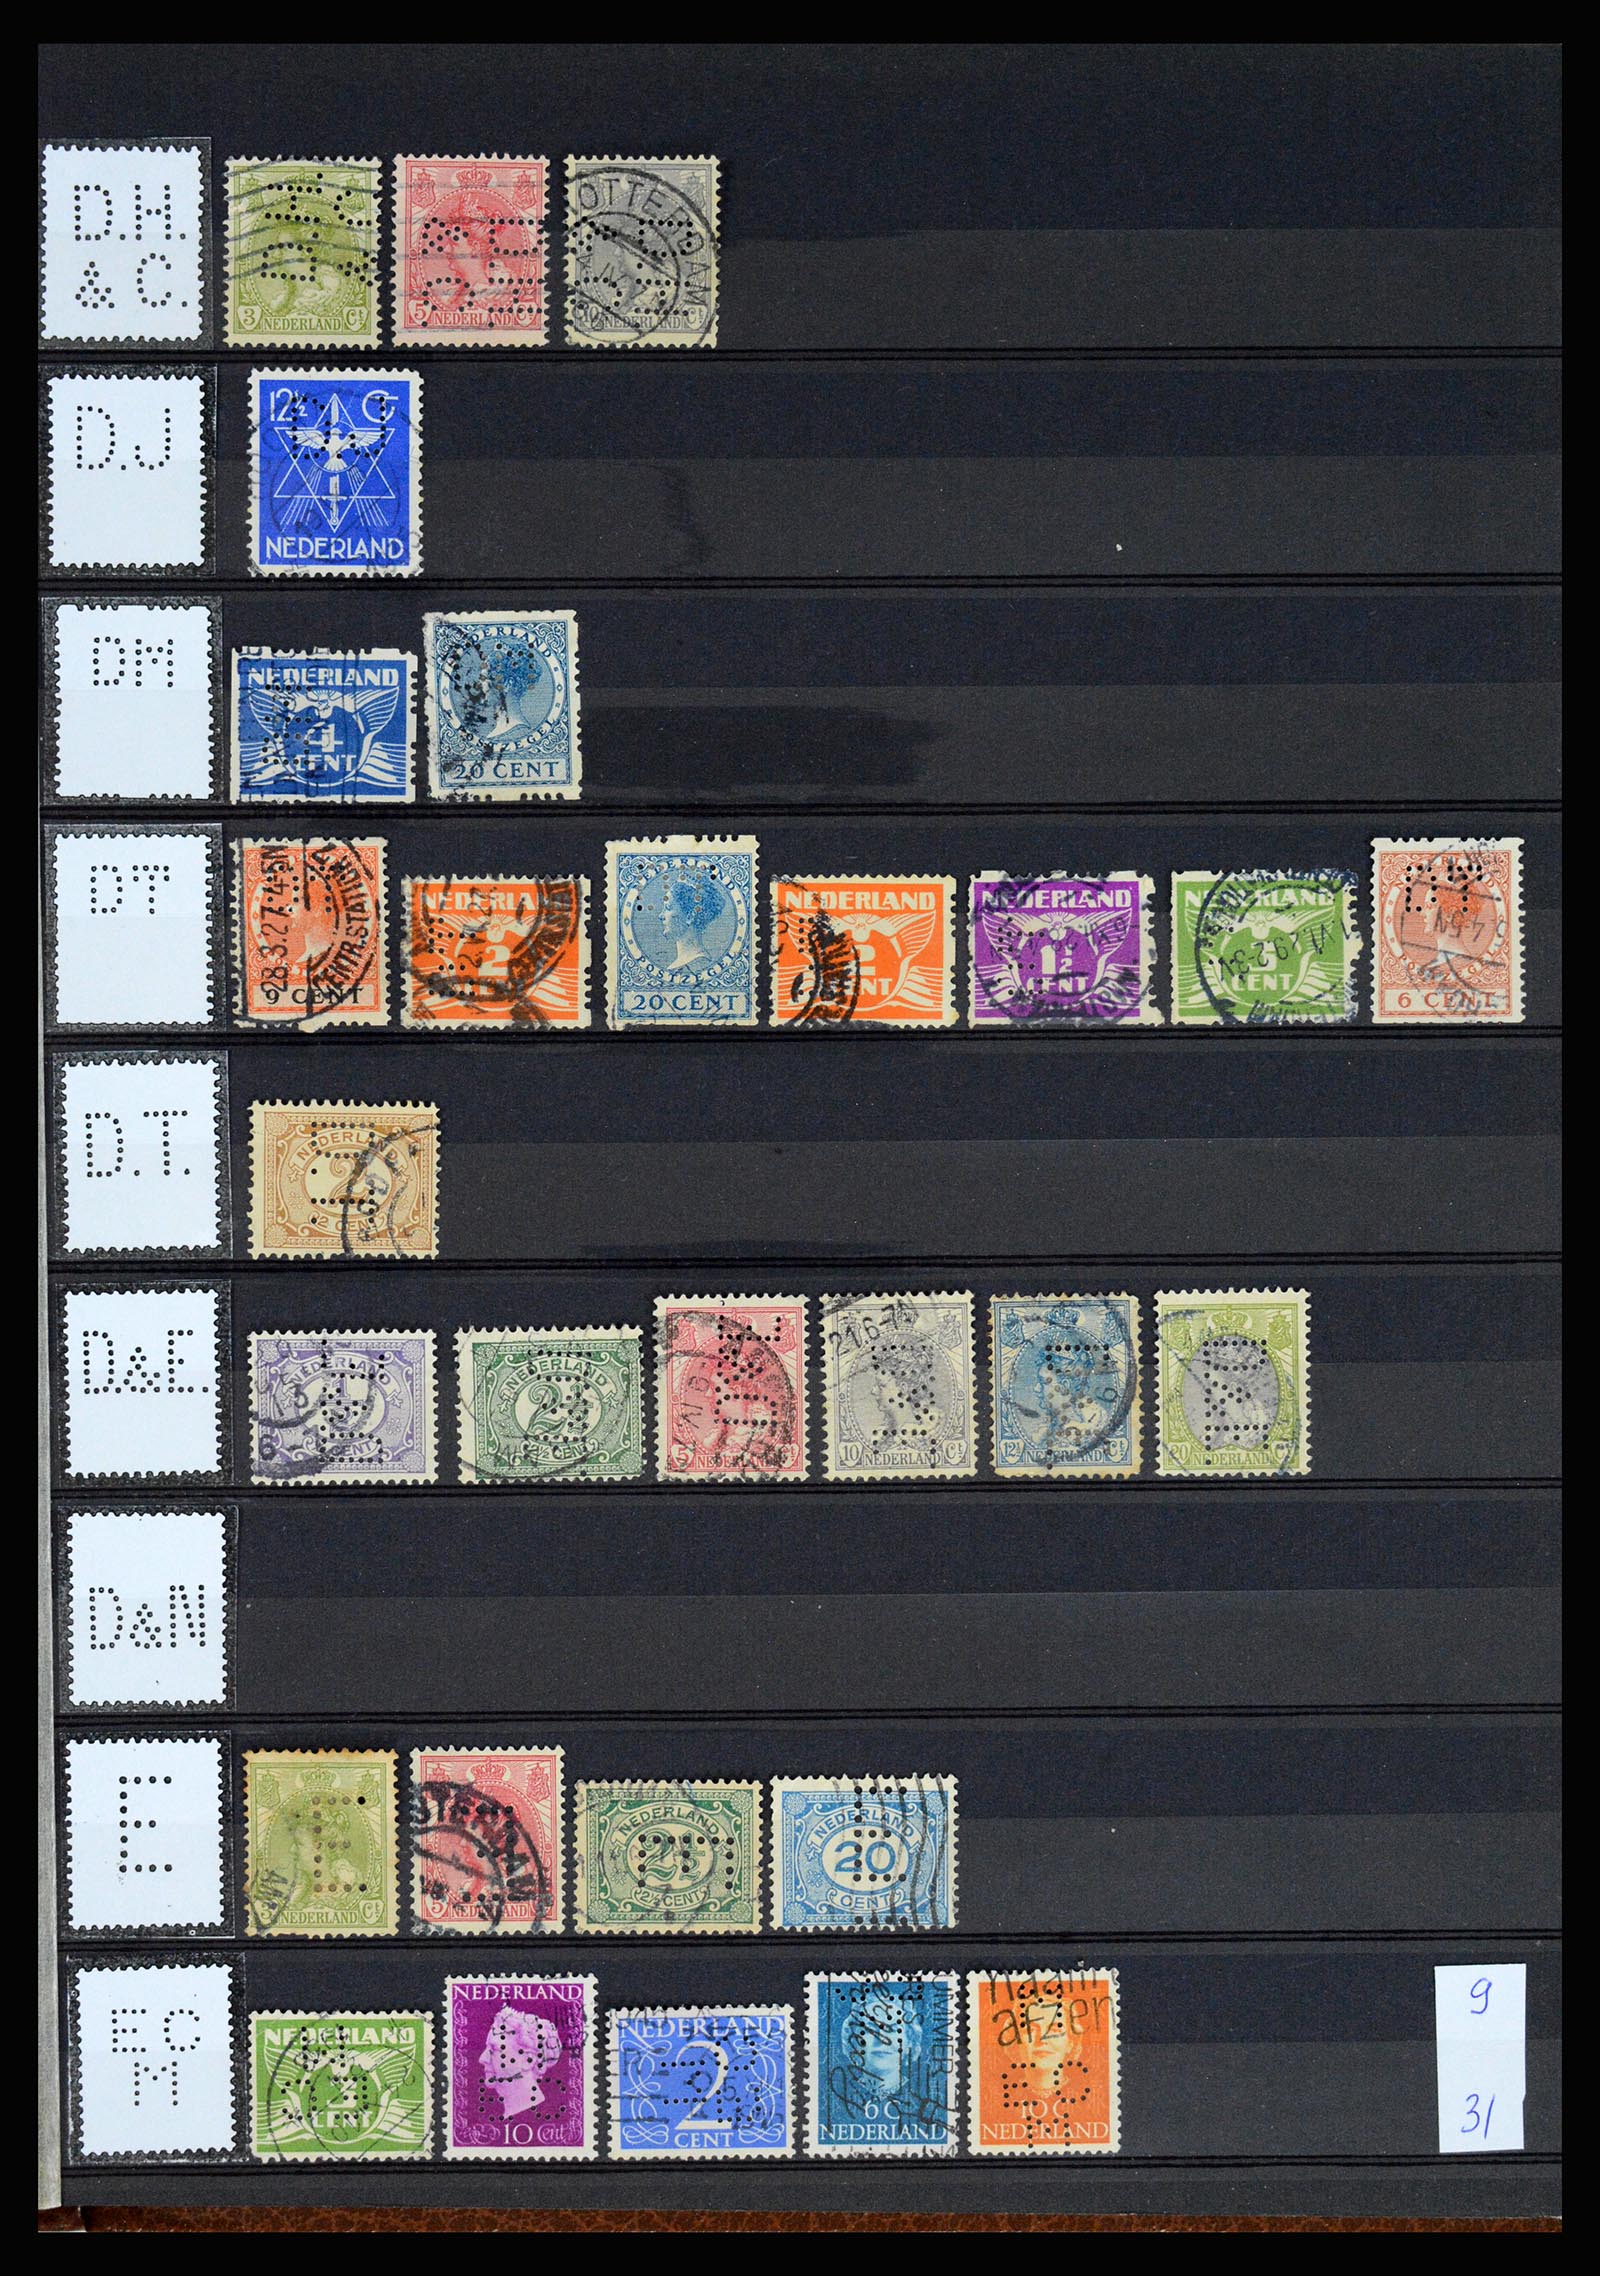 37183 010 - Stamp collection 37183 Netherlands perfins 1872-1960.